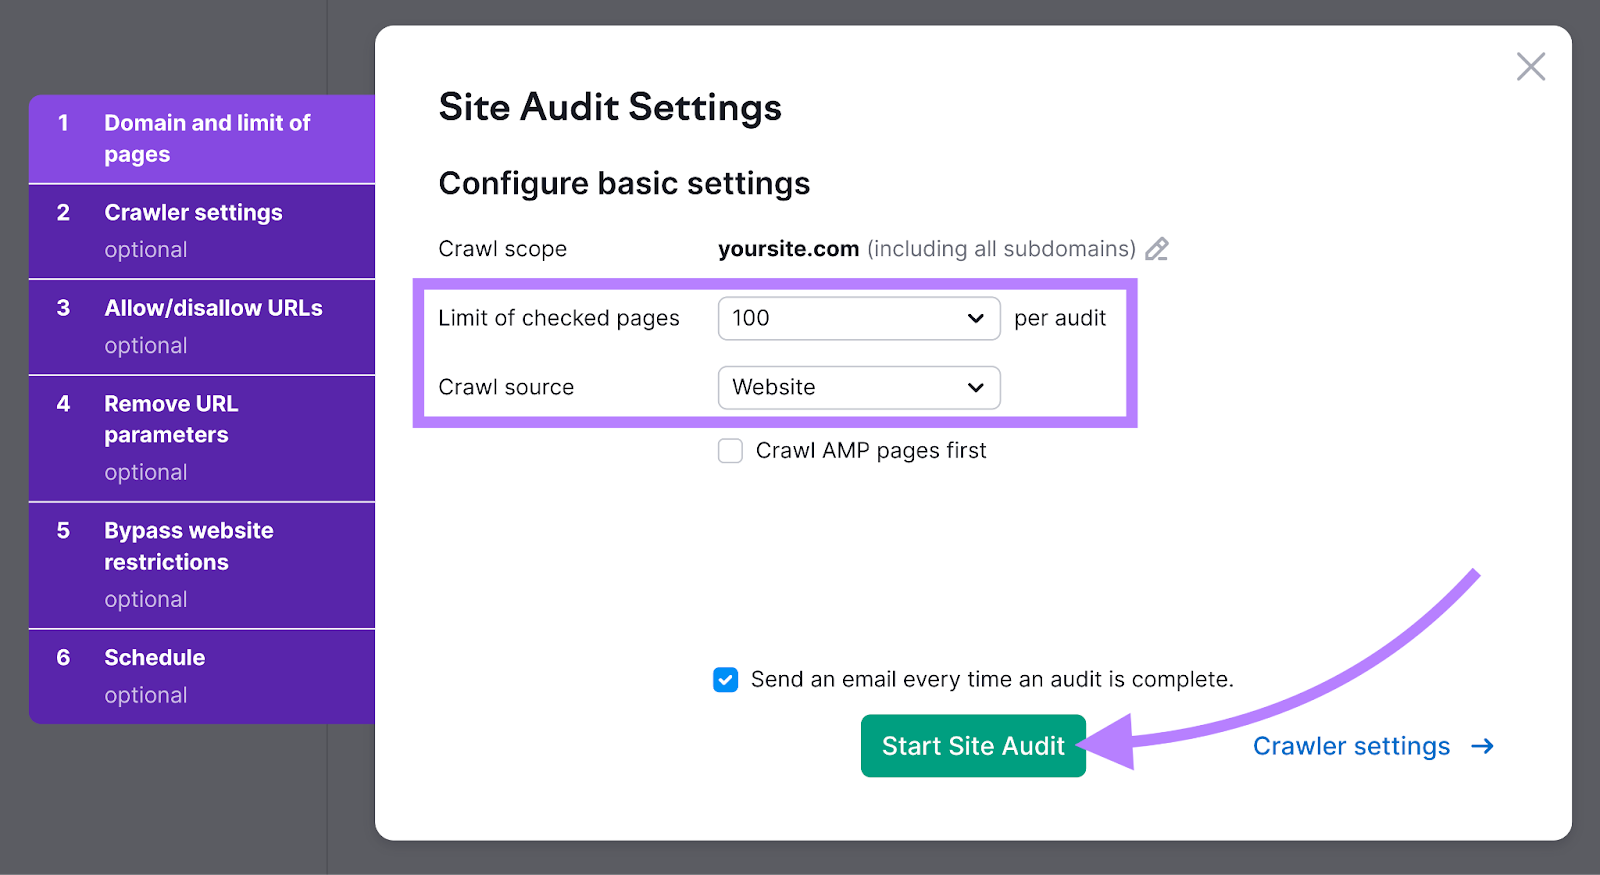 “Site Audit Settings” page